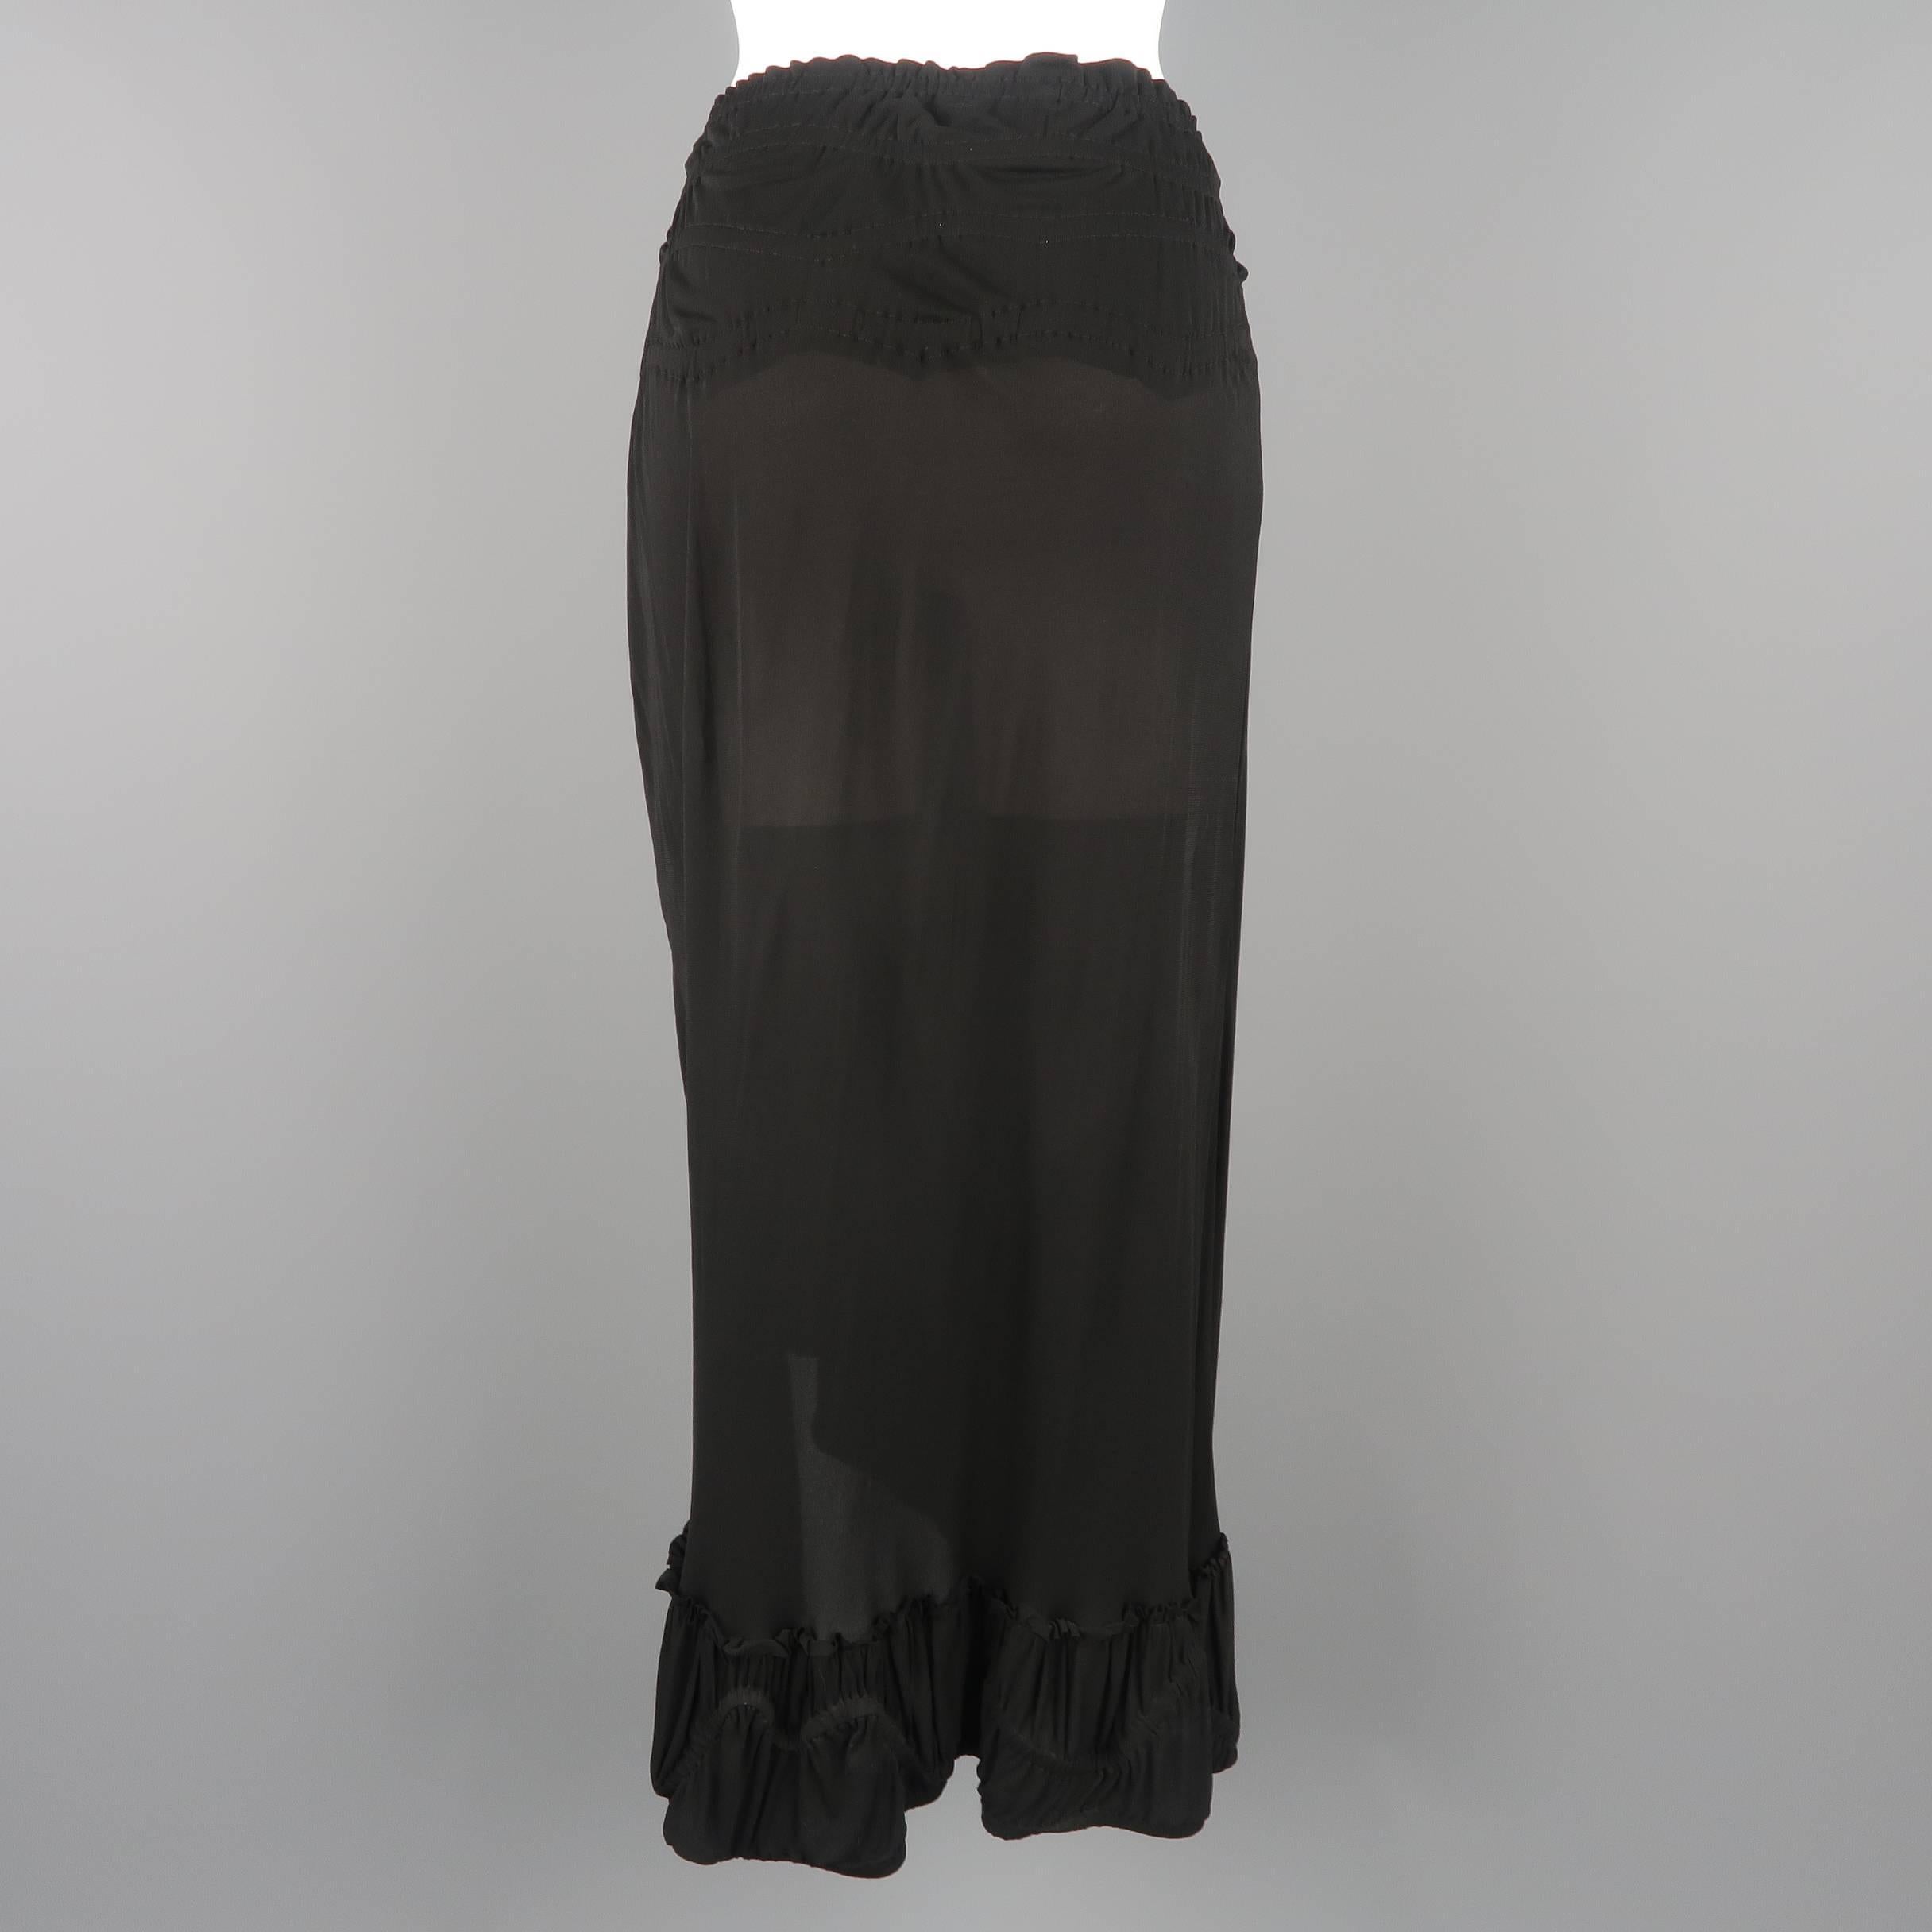 YVES SAINT LAURENT by TOM FORD Size M Black Gathered Viscose Ruffle Skirt 5